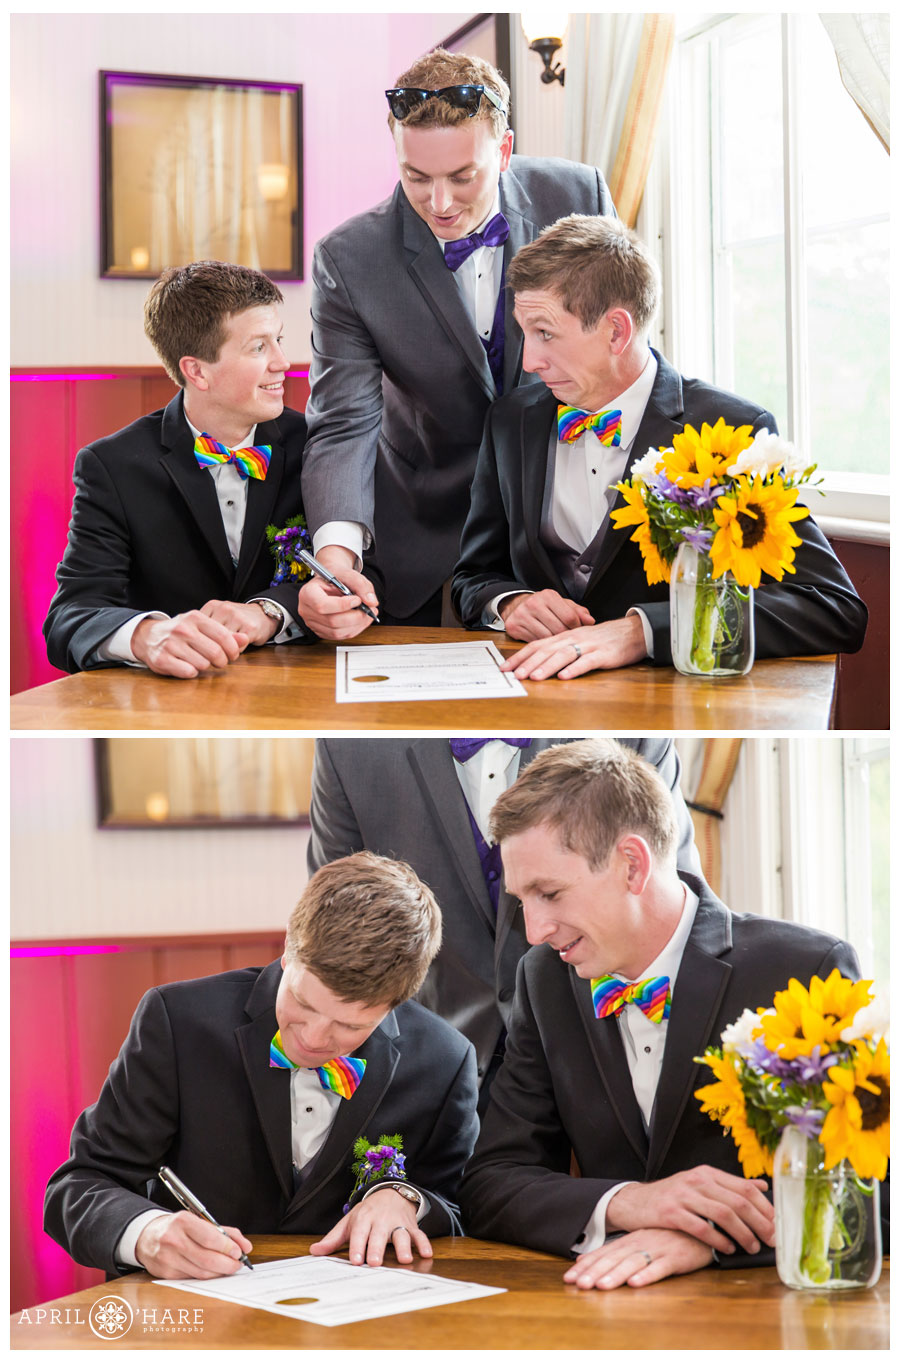 Signing marriage license at a Boulder Gay Wedding at Chautauqua Dining Hall